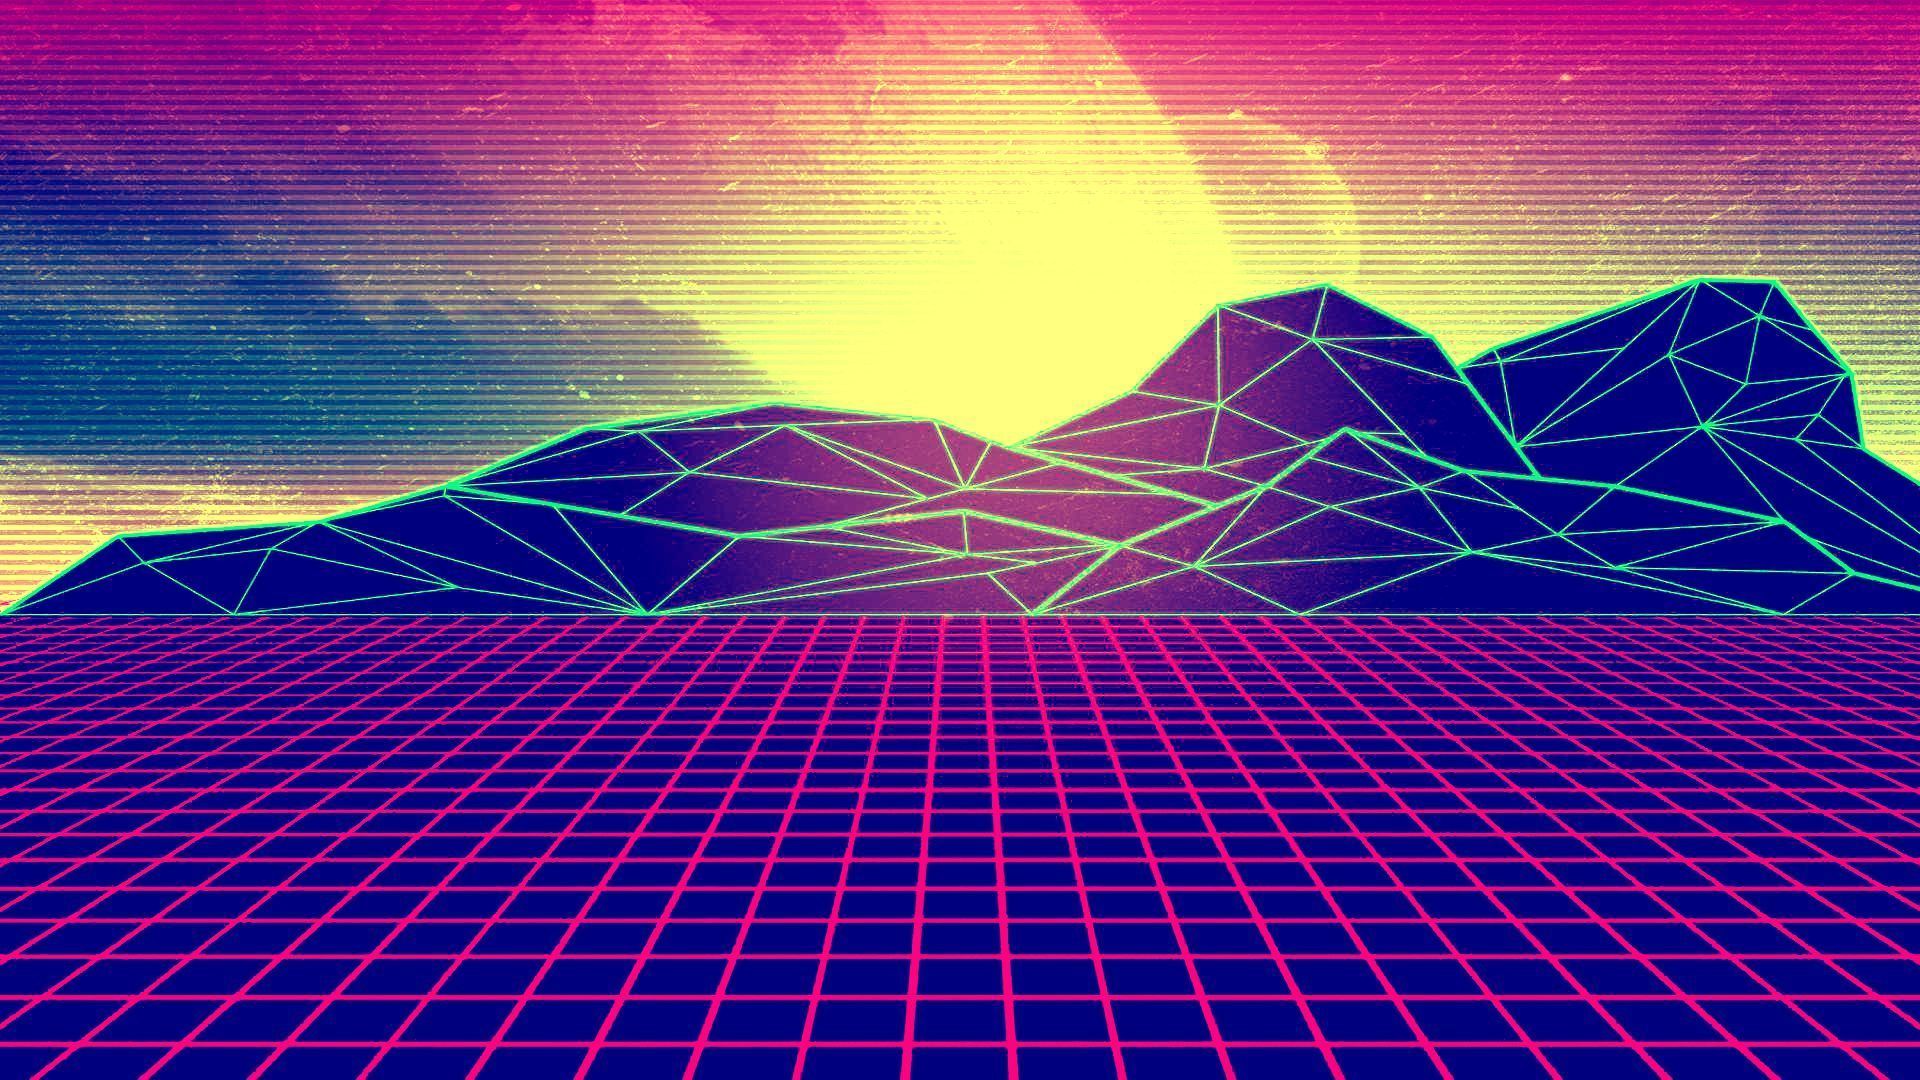 Is There A Name For This Aesthetic, Or For The Individual Elements (the Grid Landscape Low Poly Mountains City)? It's All Over The Place, And It Seems That The HIGH RES WALLPAPER People Have Polluted The